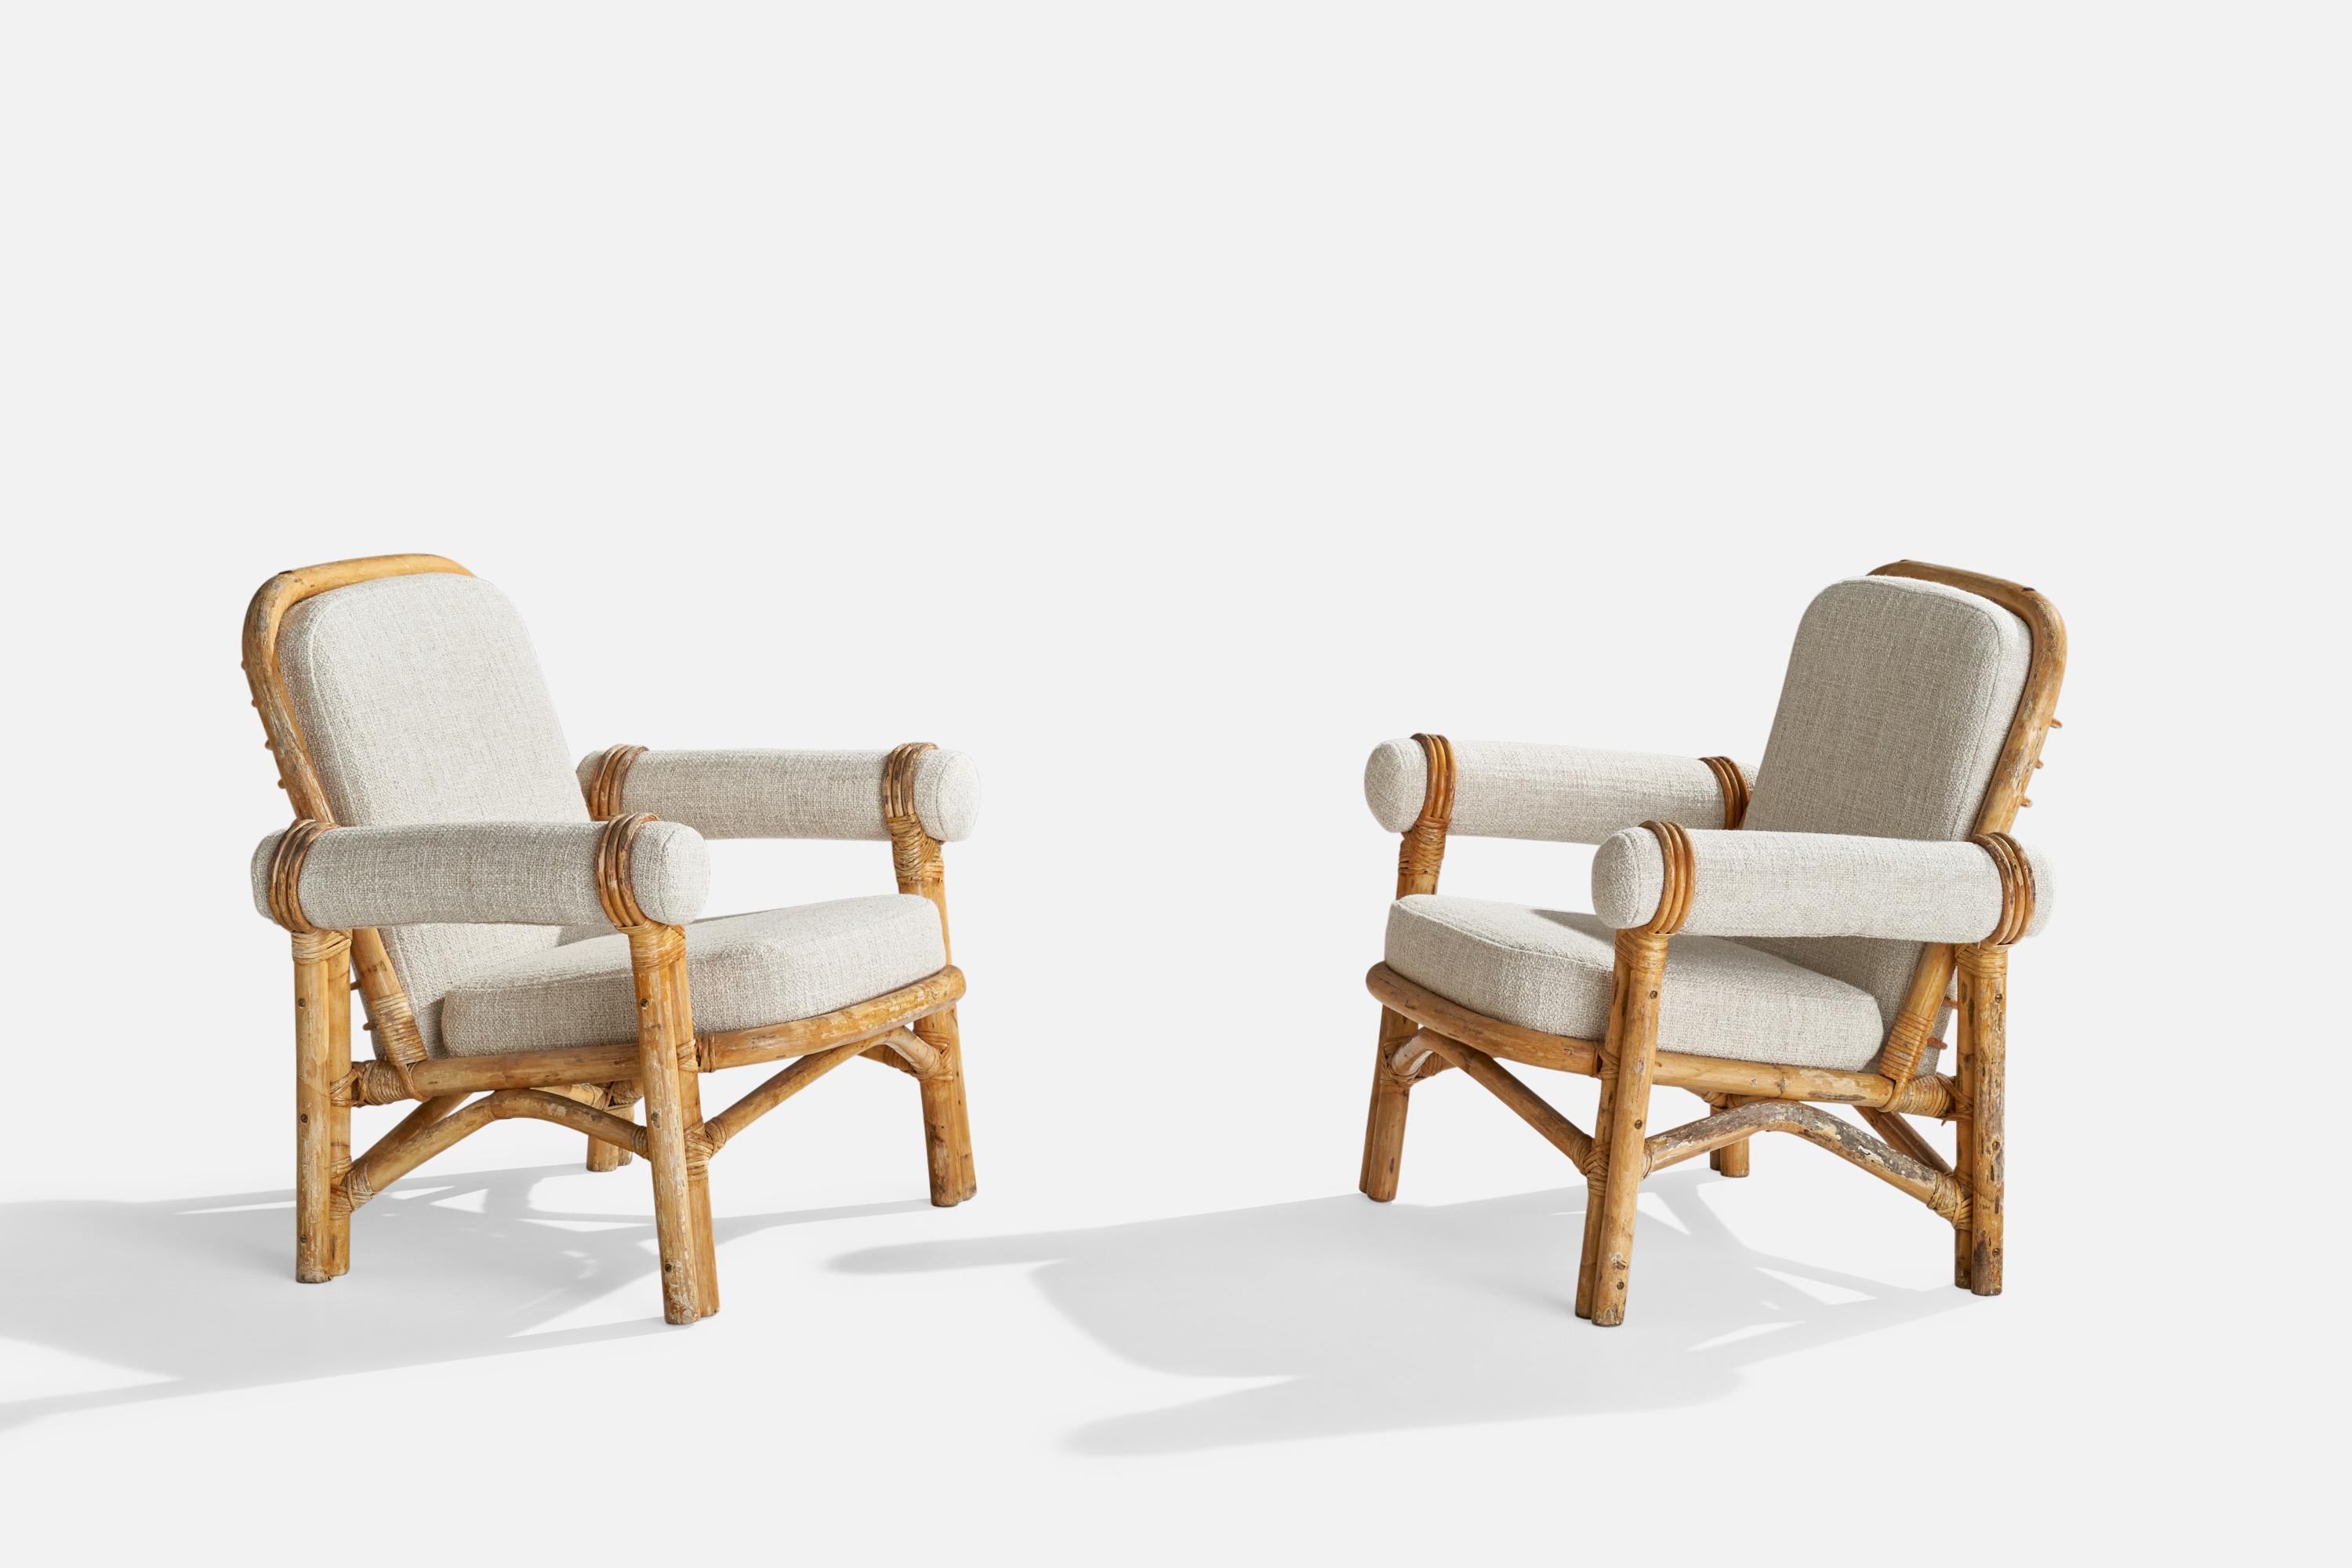 A pair of moulded bamboo, rattan and off-white fabric lounge chairs presumably designed and produced in Sweden, 1950s.

Seat height: 16.75”